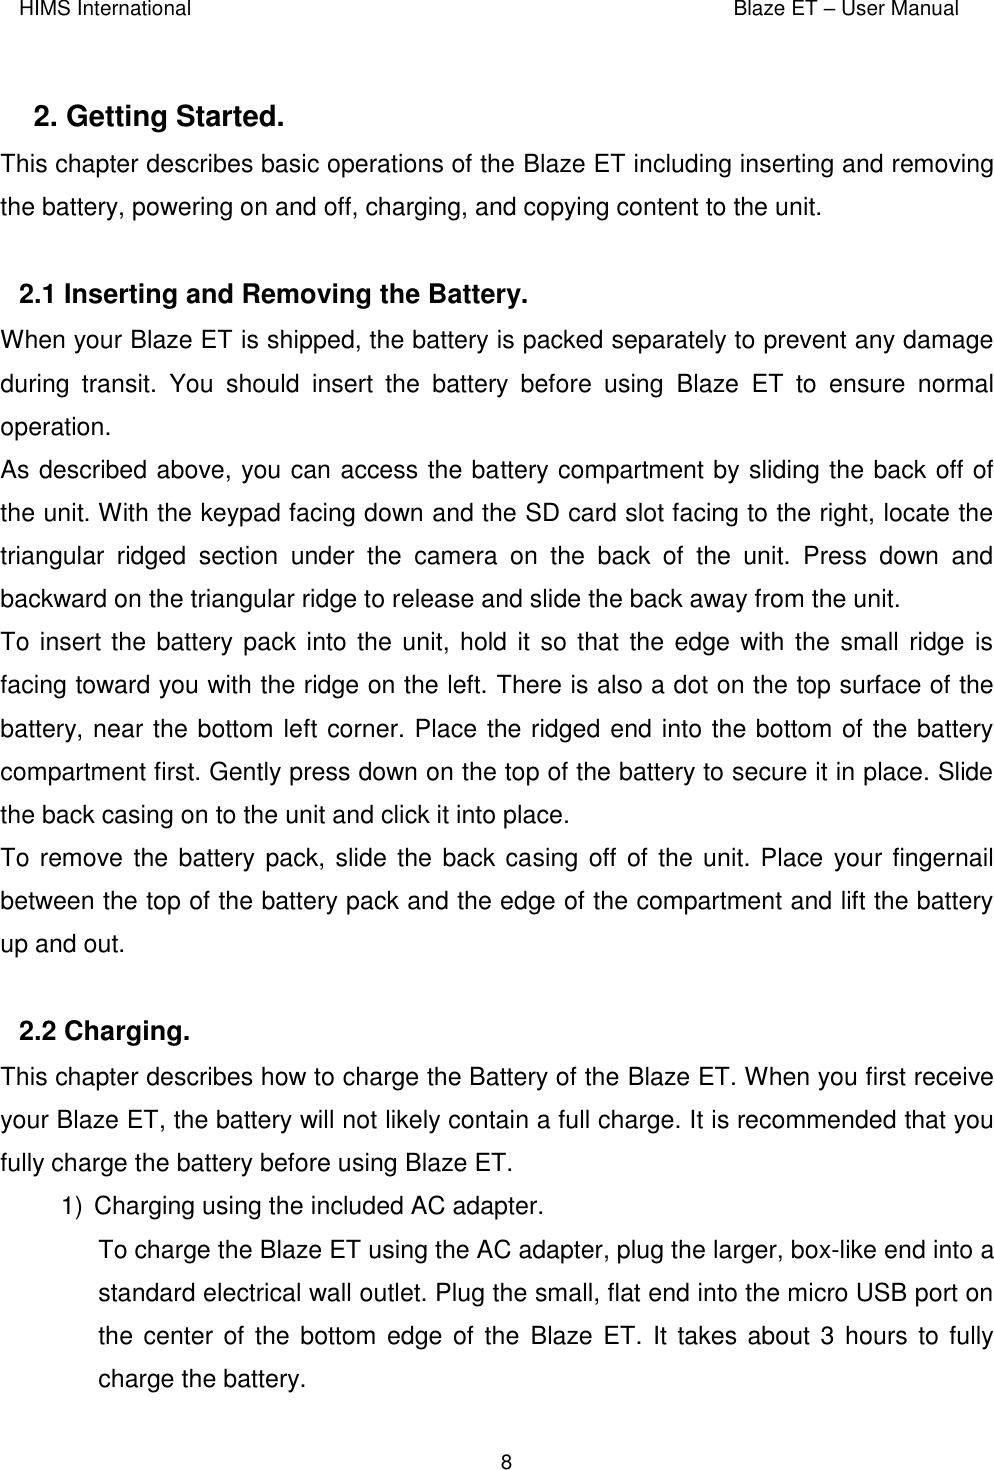 HIMS International    Blaze ET – User Manual      8  2. Getting Started.  This chapter describes basic operations of the Blaze ET including inserting and removing the battery, powering on and off, charging, and copying content to the unit.  2.1 Inserting and Removing the Battery.  When your Blaze ET is shipped, the battery is packed separately to prevent any damage during  transit.  You  should  insert  the  battery  before  using  Blaze  ET  to  ensure  normal operation. As described above, you can access the battery compartment by sliding the back off of the unit. With the keypad facing down and the SD card slot facing to the right, locate the triangular  ridged  section  under  the  camera  on  the  back  of  the  unit.  Press  down  and backward on the triangular ridge to release and slide the back away from the unit. To insert the battery pack into the unit, hold it so that the edge with the small ridge is facing toward you with the ridge on the left. There is also a dot on the top surface of the battery, near the bottom left corner. Place the ridged end into the bottom of the battery compartment first. Gently press down on the top of the battery to secure it in place. Slide the back casing on to the unit and click it into place. To remove the battery pack, slide the back casing  off of the unit. Place your fingernail between the top of the battery pack and the edge of the compartment and lift the battery up and out.  2.2 Charging.  This chapter describes how to charge the Battery of the Blaze ET. When you first receive your Blaze ET, the battery will not likely contain a full charge. It is recommended that you fully charge the battery before using Blaze ET. 1)  Charging using the included AC adapter.  To charge the Blaze ET using the AC adapter, plug the larger, box-like end into a standard electrical wall outlet. Plug the small, flat end into the micro USB port on the center of the bottom edge of the  Blaze ET. It takes about 3 hours  to fully charge the battery. 